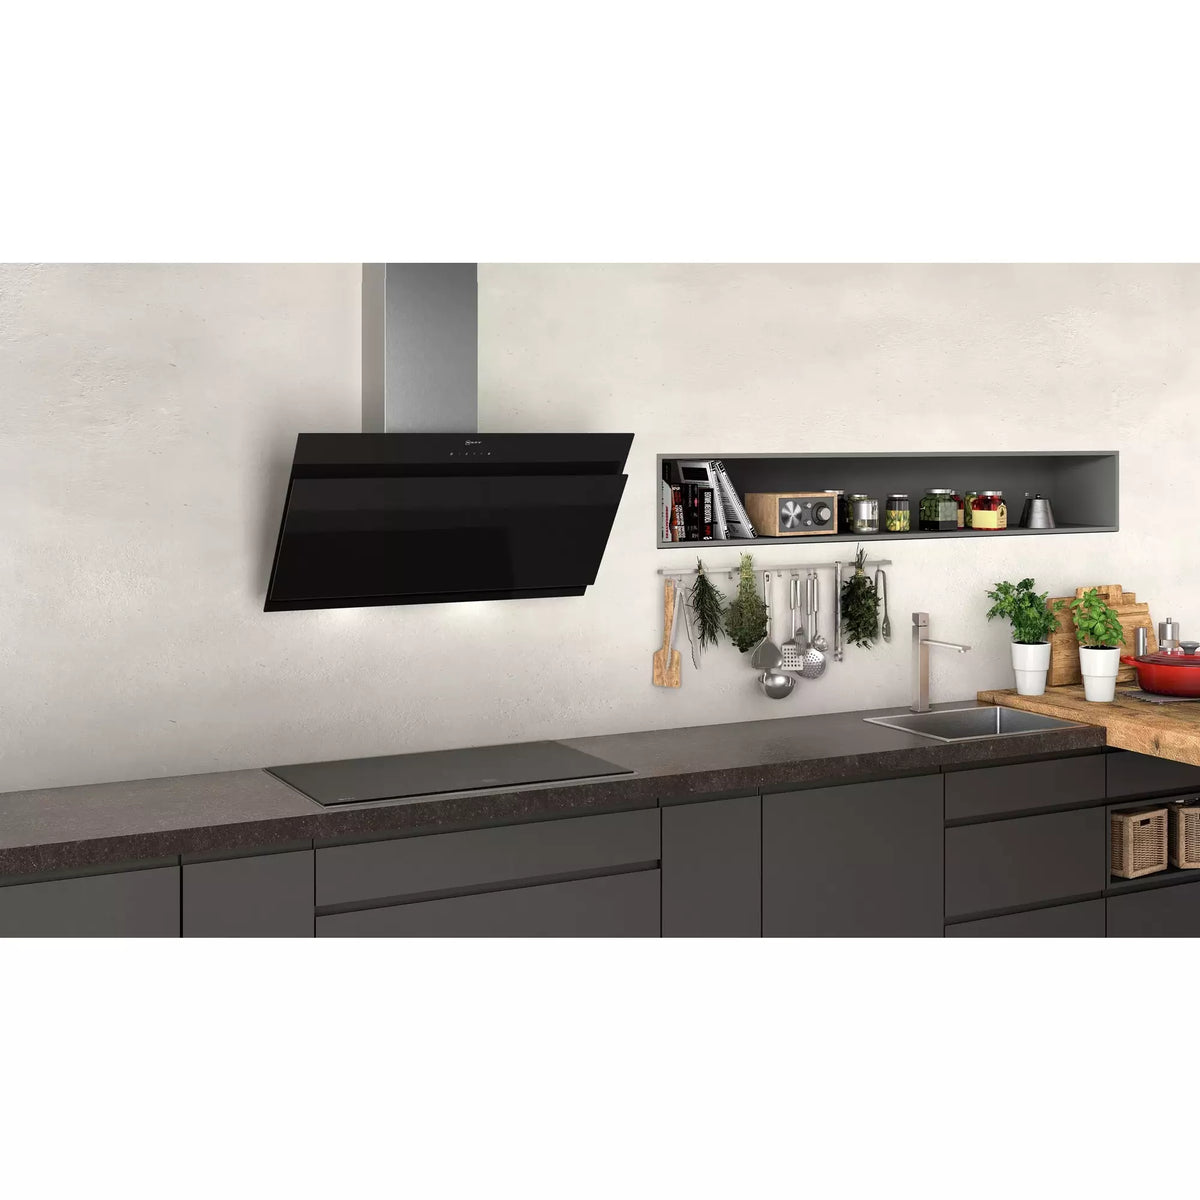 Neff N50 90cm Wall-mounted Cooker Hood - Black | D95IHM1S0B from Neff - DID Electrical